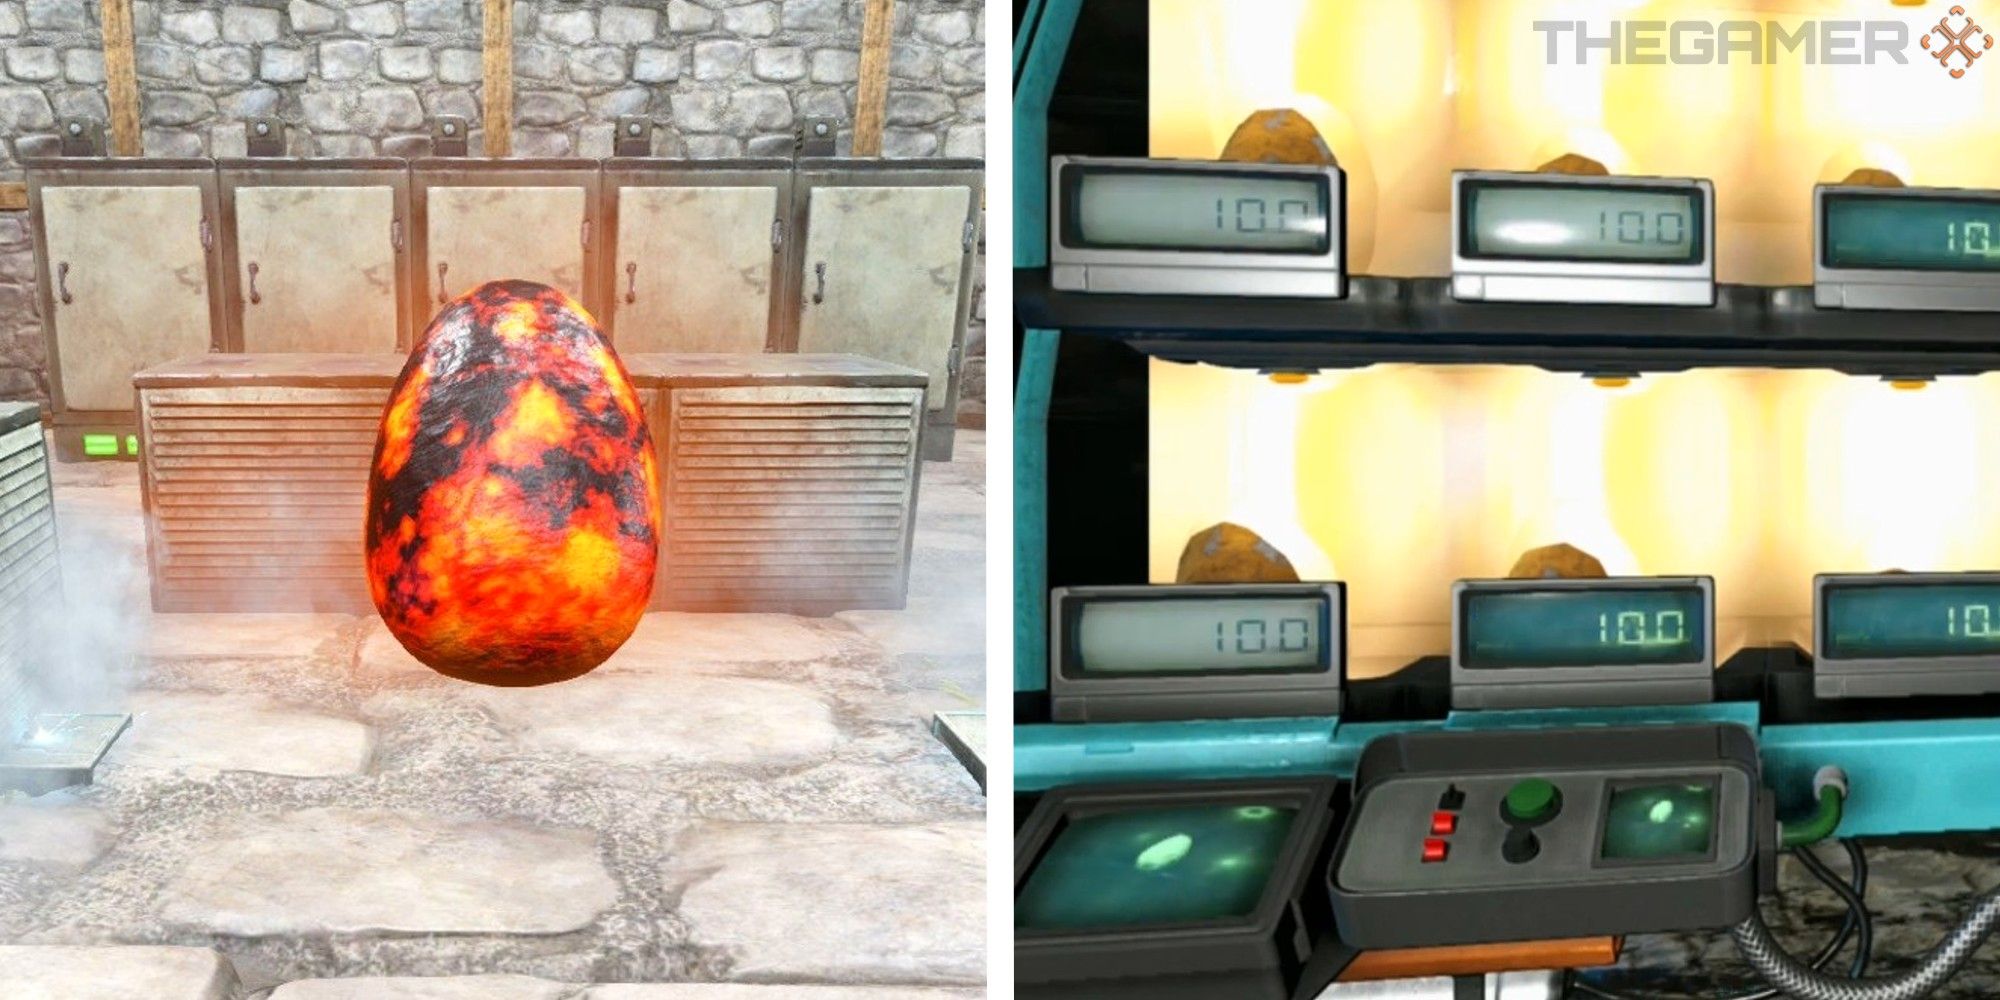 image of red egg next to image of eggs in incubator